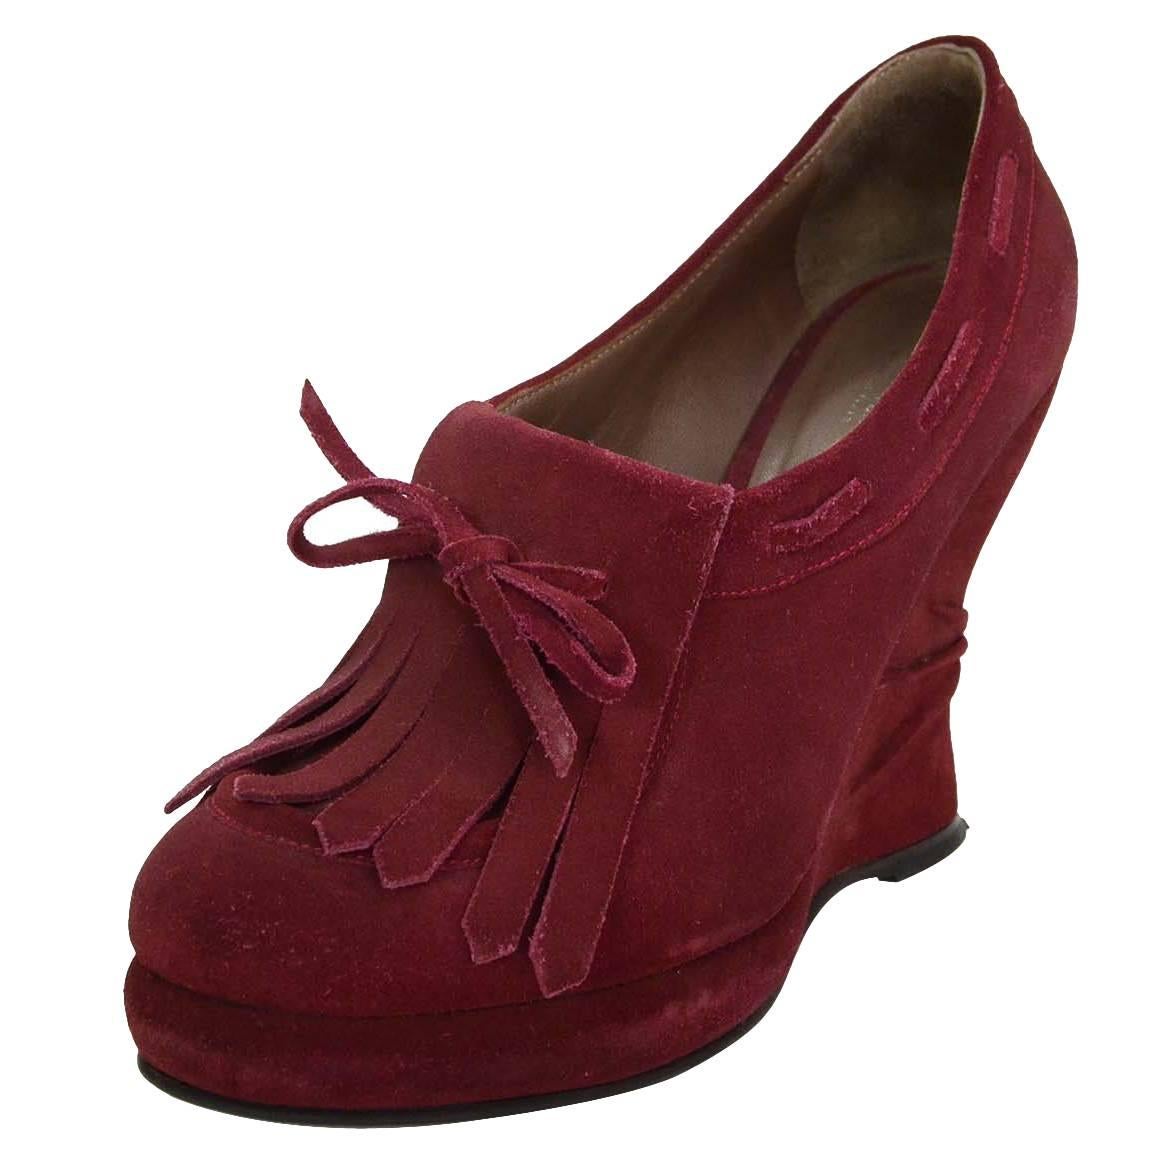 Bottega Veneta Suede Oxford Wedges 
Features ruching at suede covered wedge

Made In: Italy
Color: Burgundy
Materials: Suede
Closure/Opening: Pull on
Sole Stamp: Bottega Veneta Made in Italy 40
Overall Condition: Excellent pre-owned condition with